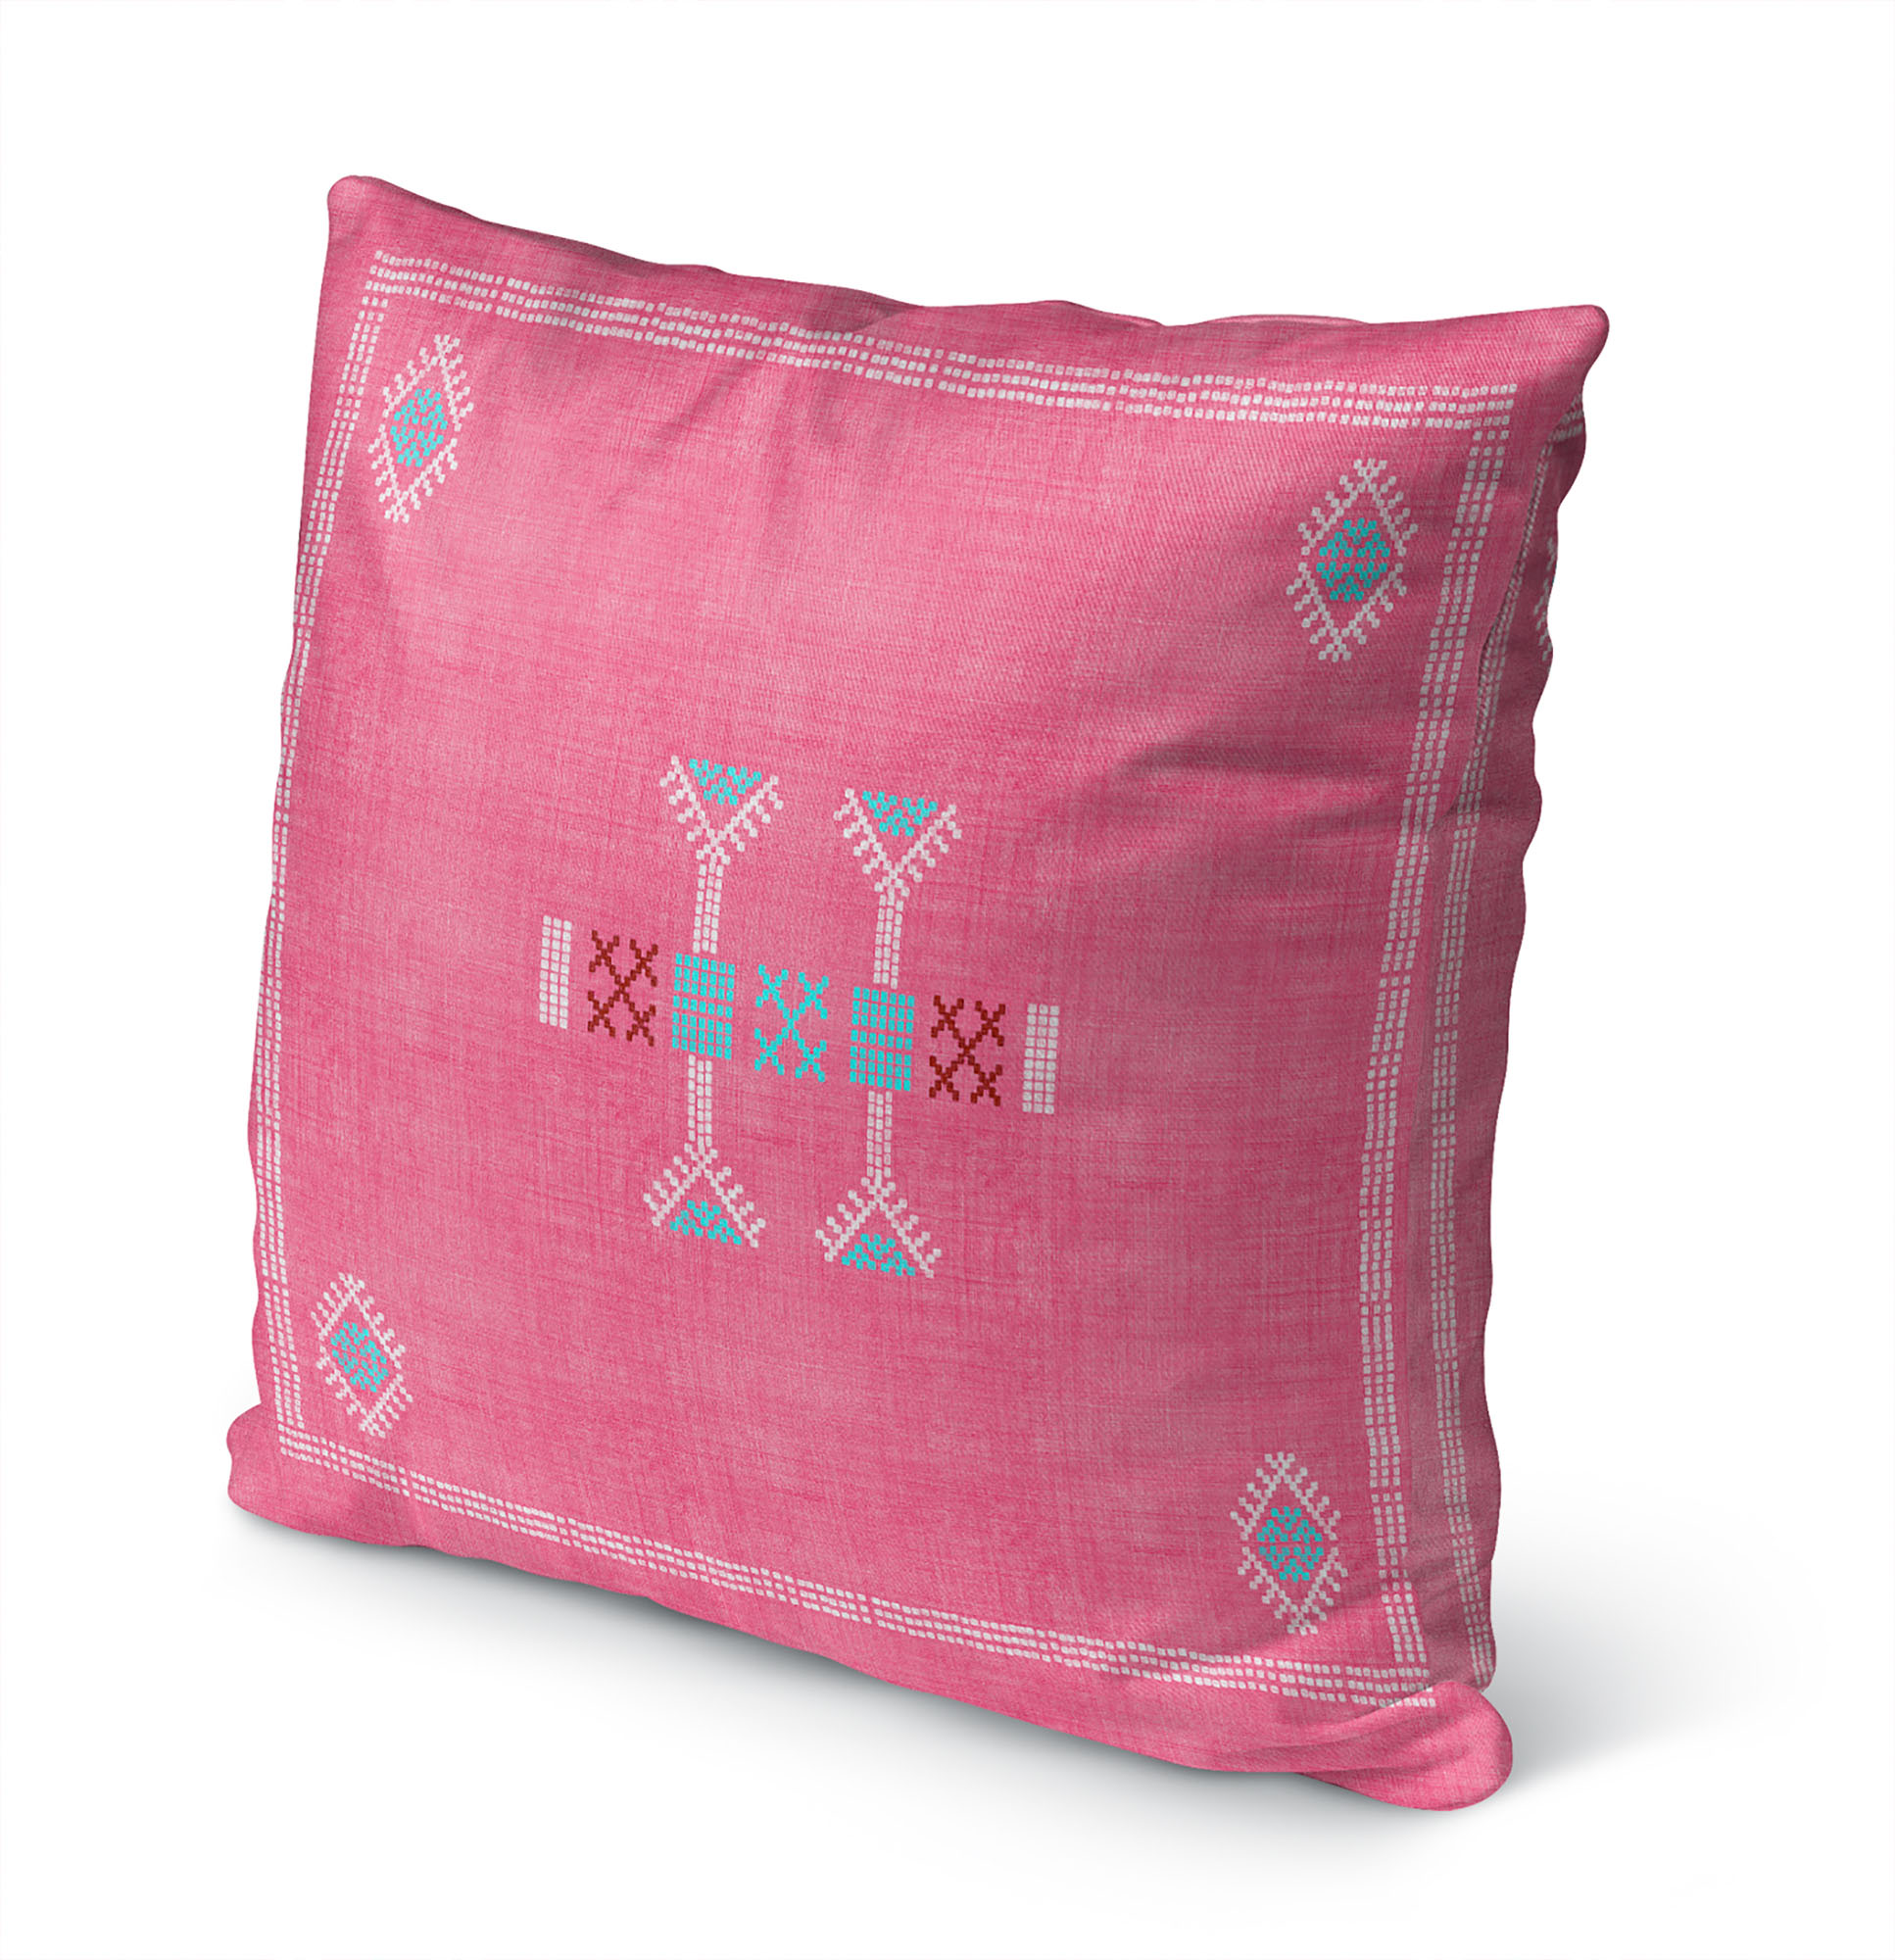 Moroccan Kilim Pink Outdoor Pillow by Kavka Designs - image 3 of 5